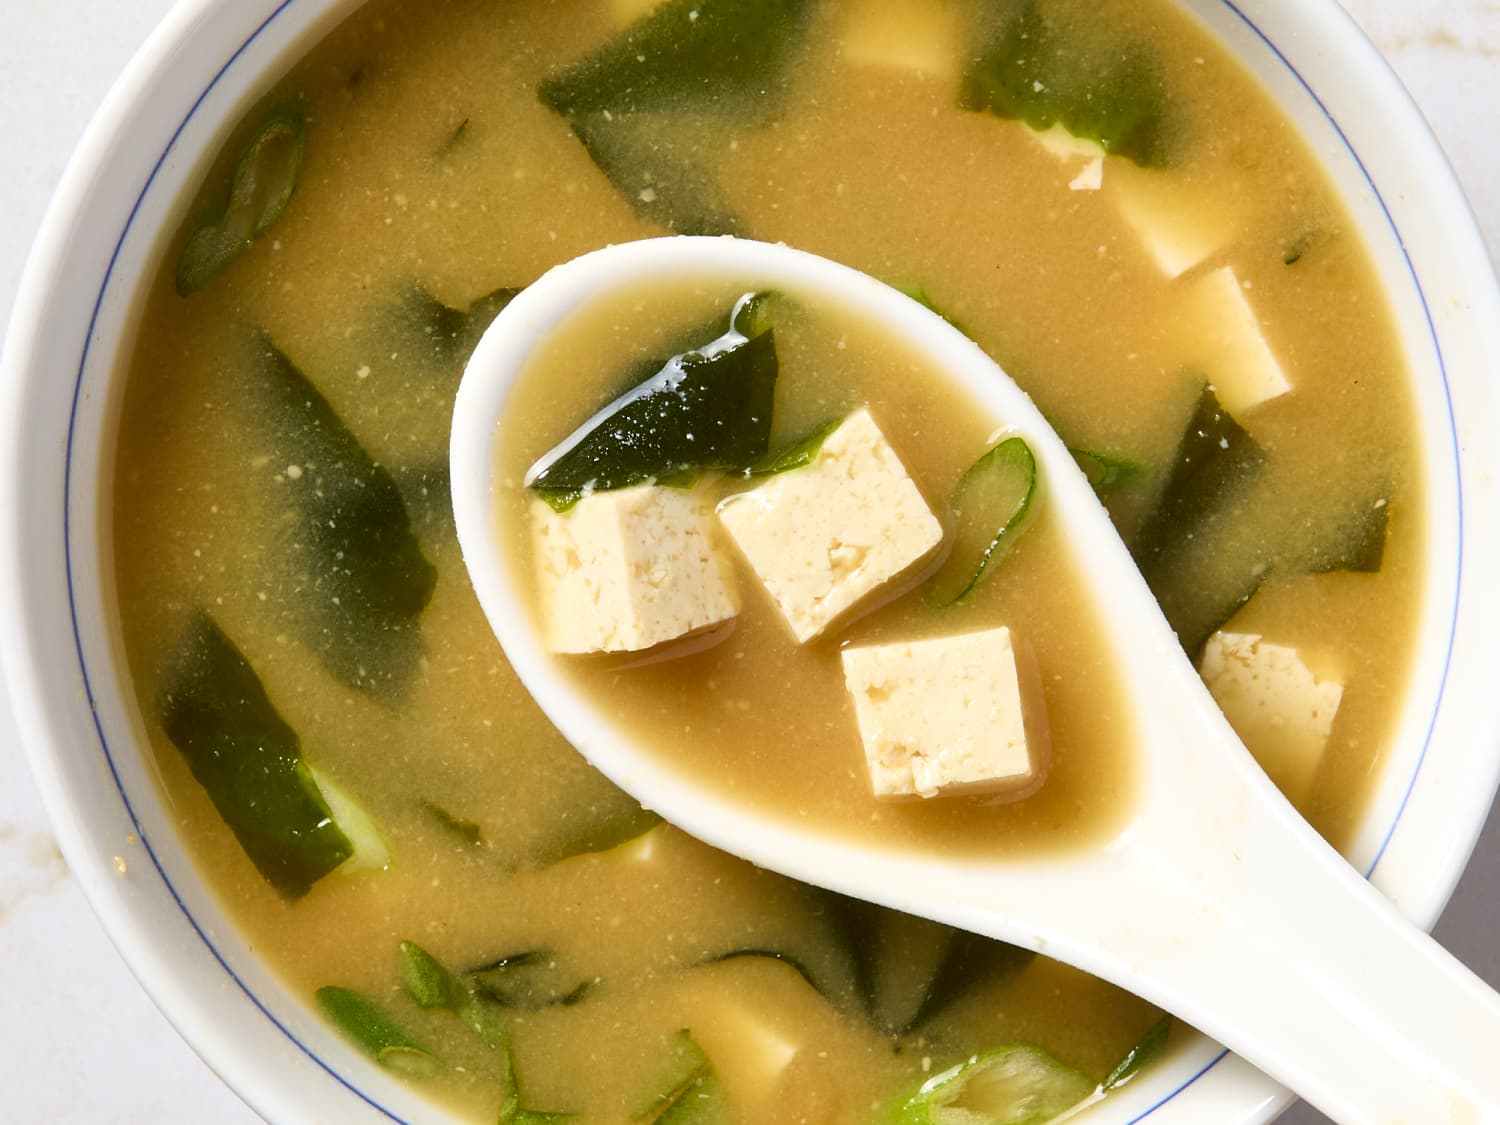 Homemade Miso Soup Recipe (Just 5 Ingredients)